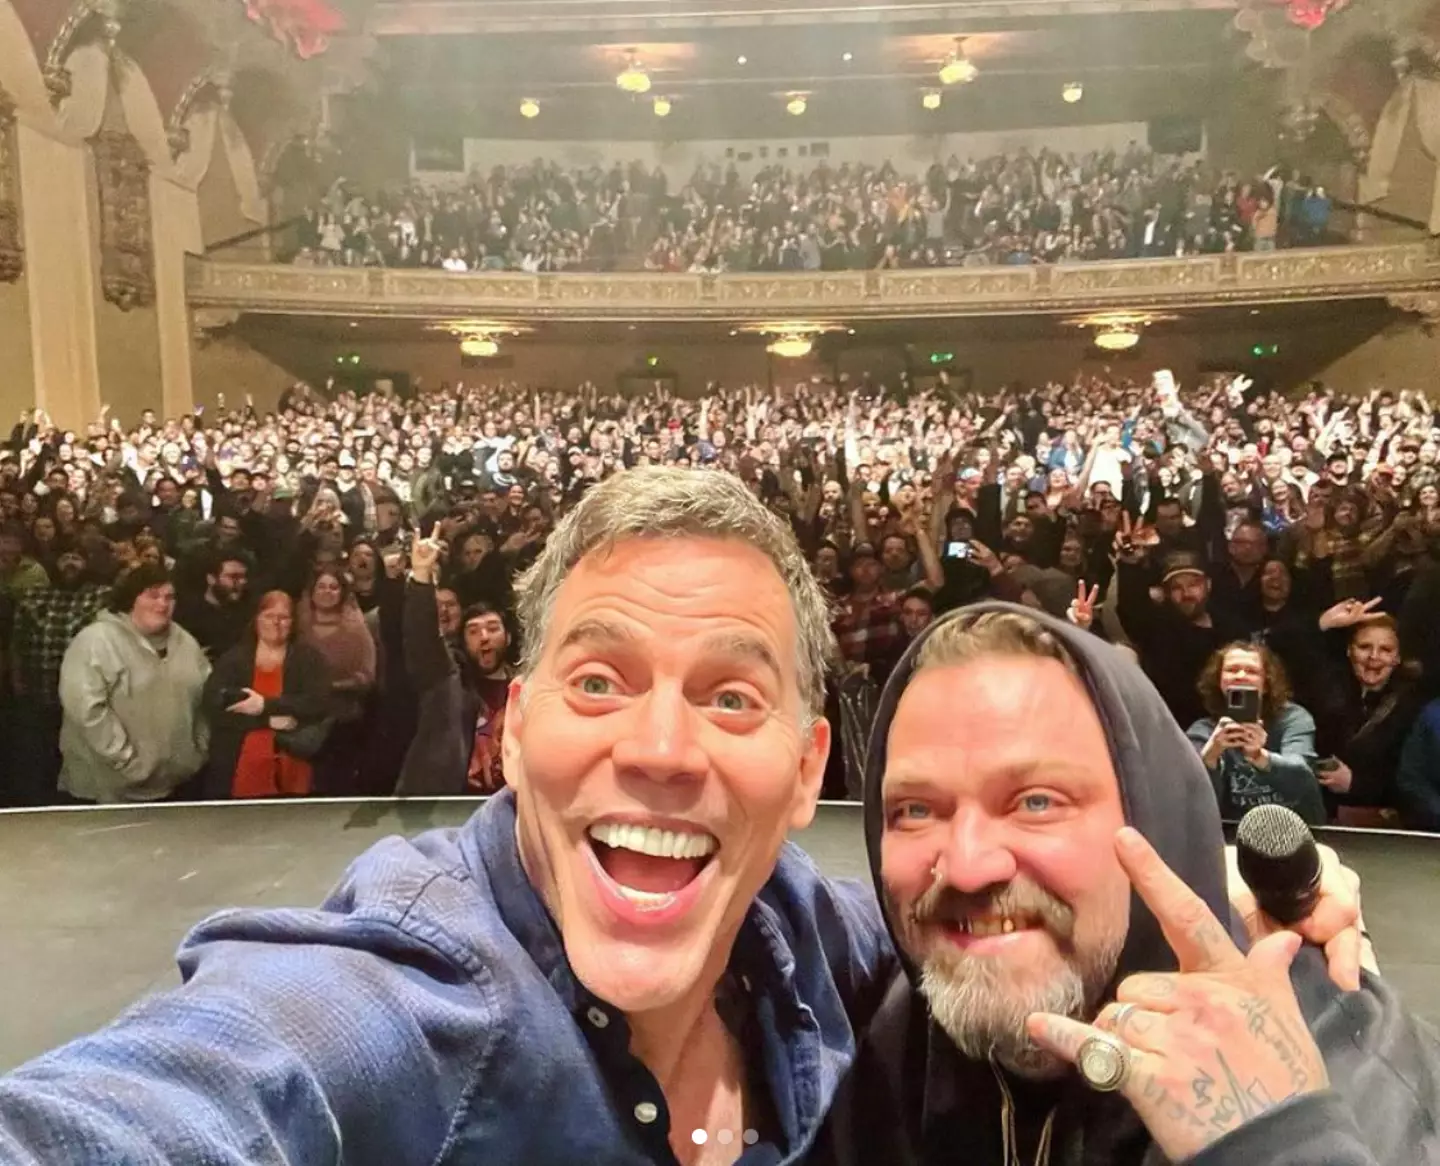 Steve-O has taken Margera under his wing.